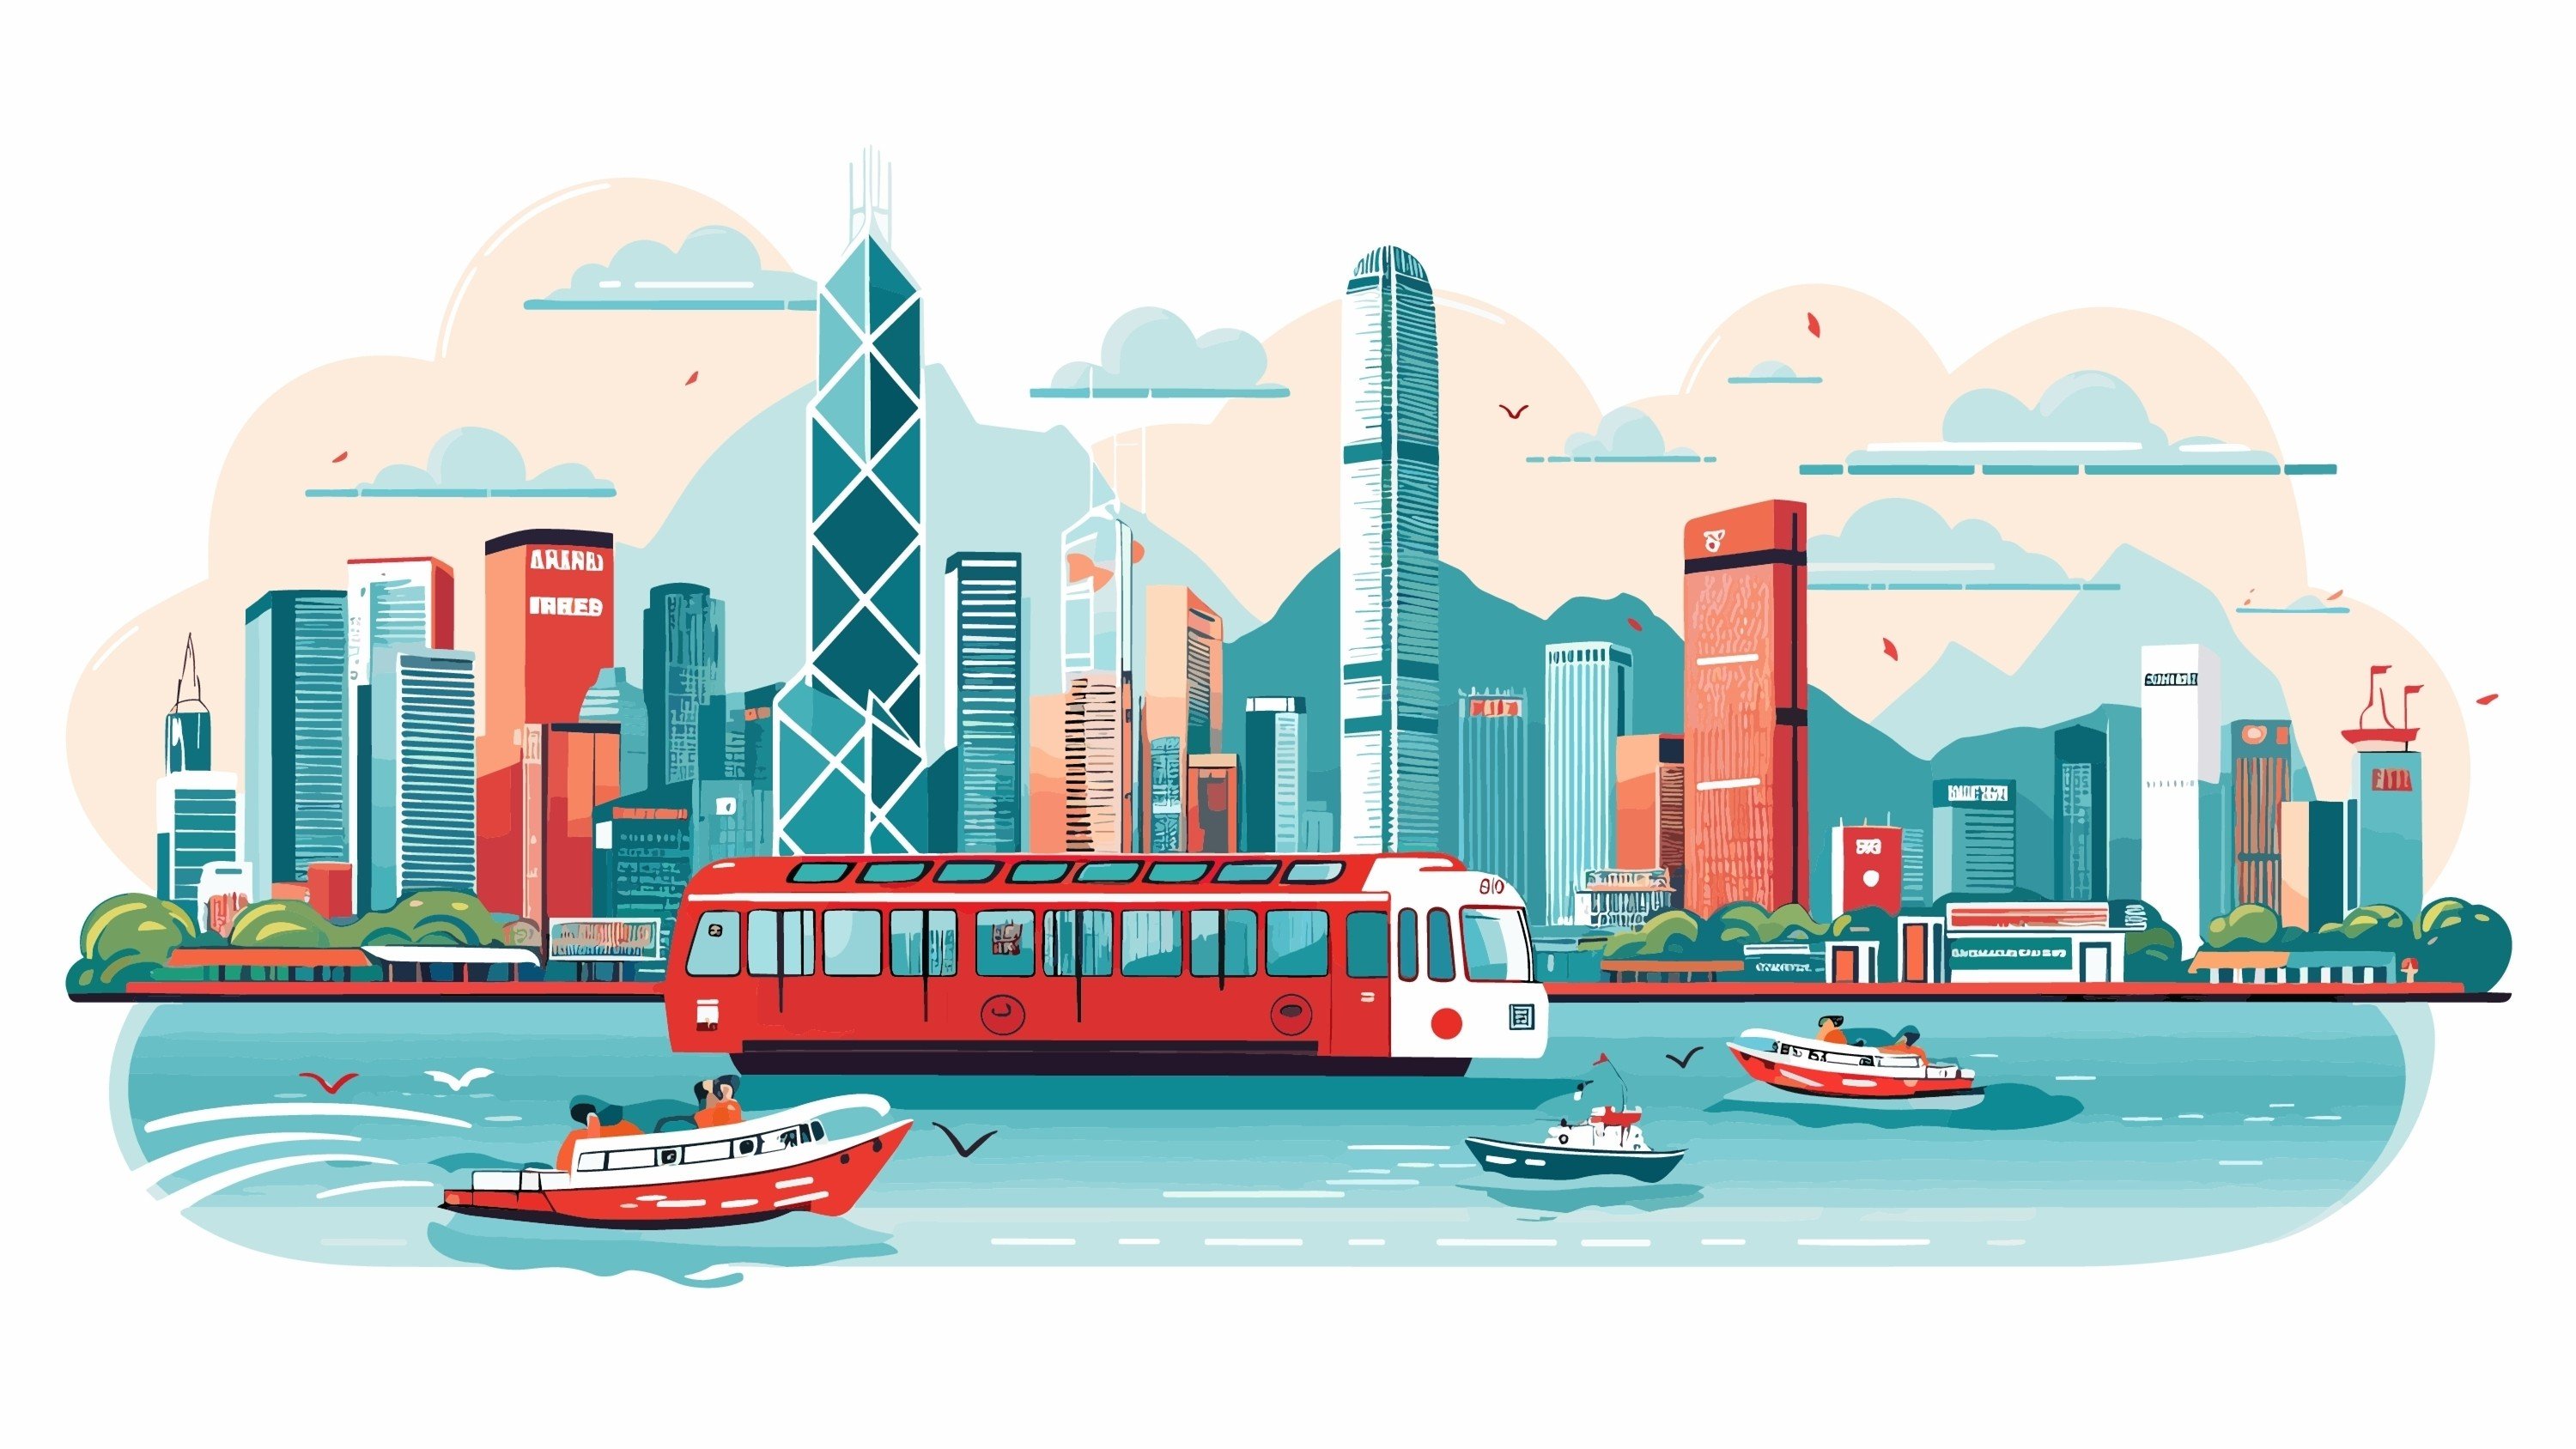 Study topics such as Hong Kong’s role in the Greater Bay Area and the Basic Law for the Citizenship and Social Development exam. Photo: Shutterstock